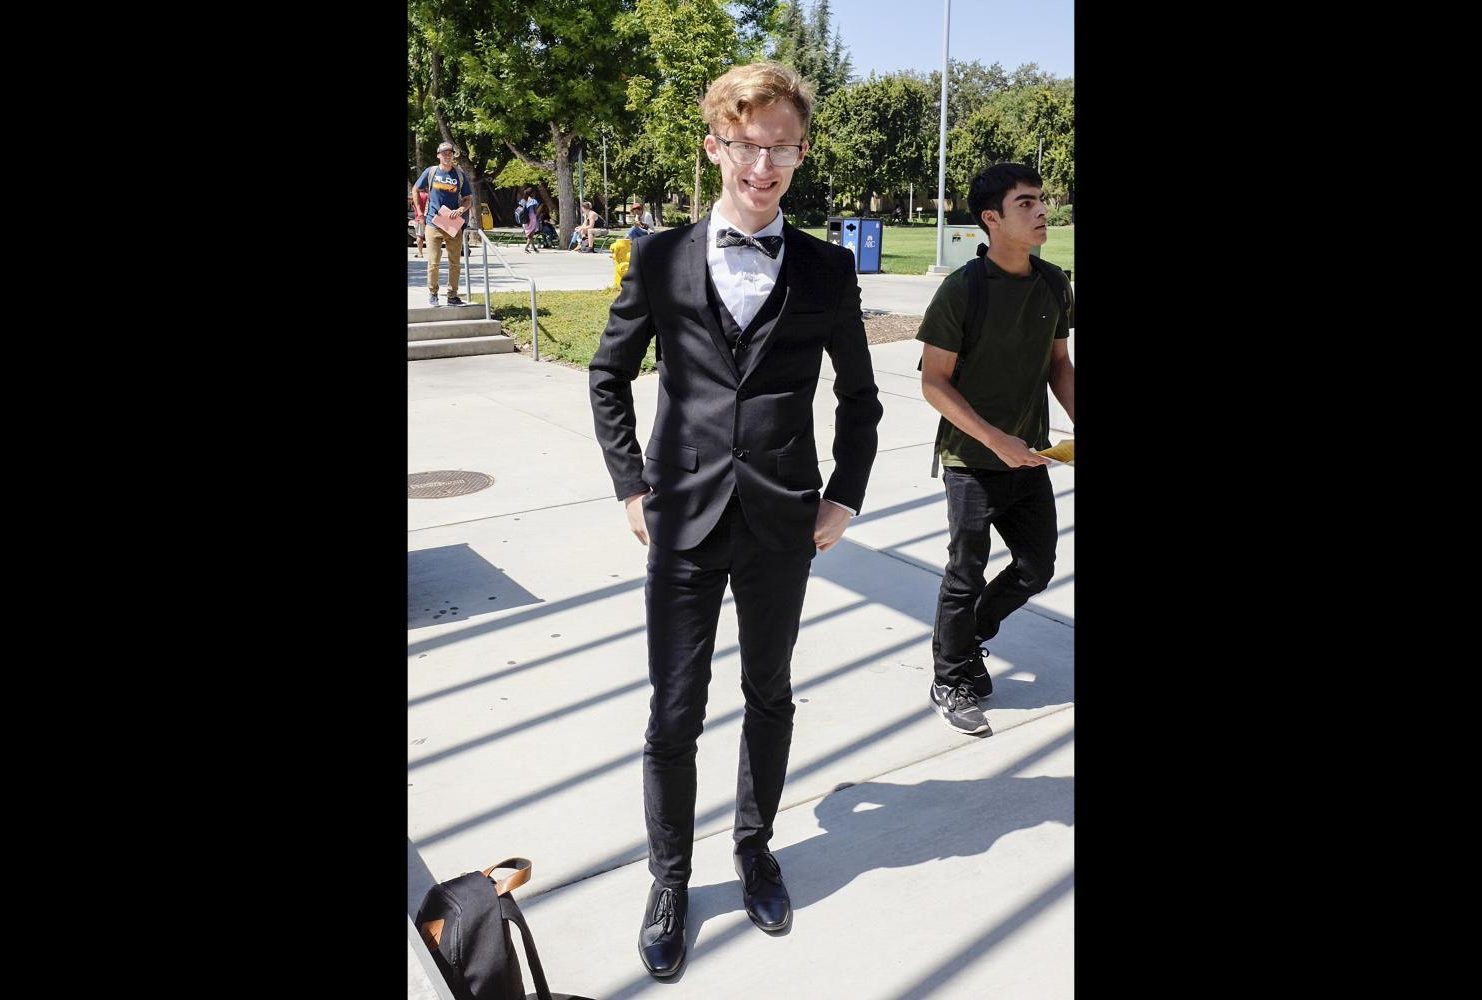 Computer tech major, Jacob McFatter wears a suit and bowtie at American River College for National Bowtie Day on Aug. 28. “I saw that it was National Bowtie Day and I thought ‘Why not wear a suit?’ Cause I mean you need something to look classy with a bowtie,” McFatter said. (Photo by Patrick Hyun Wilson)